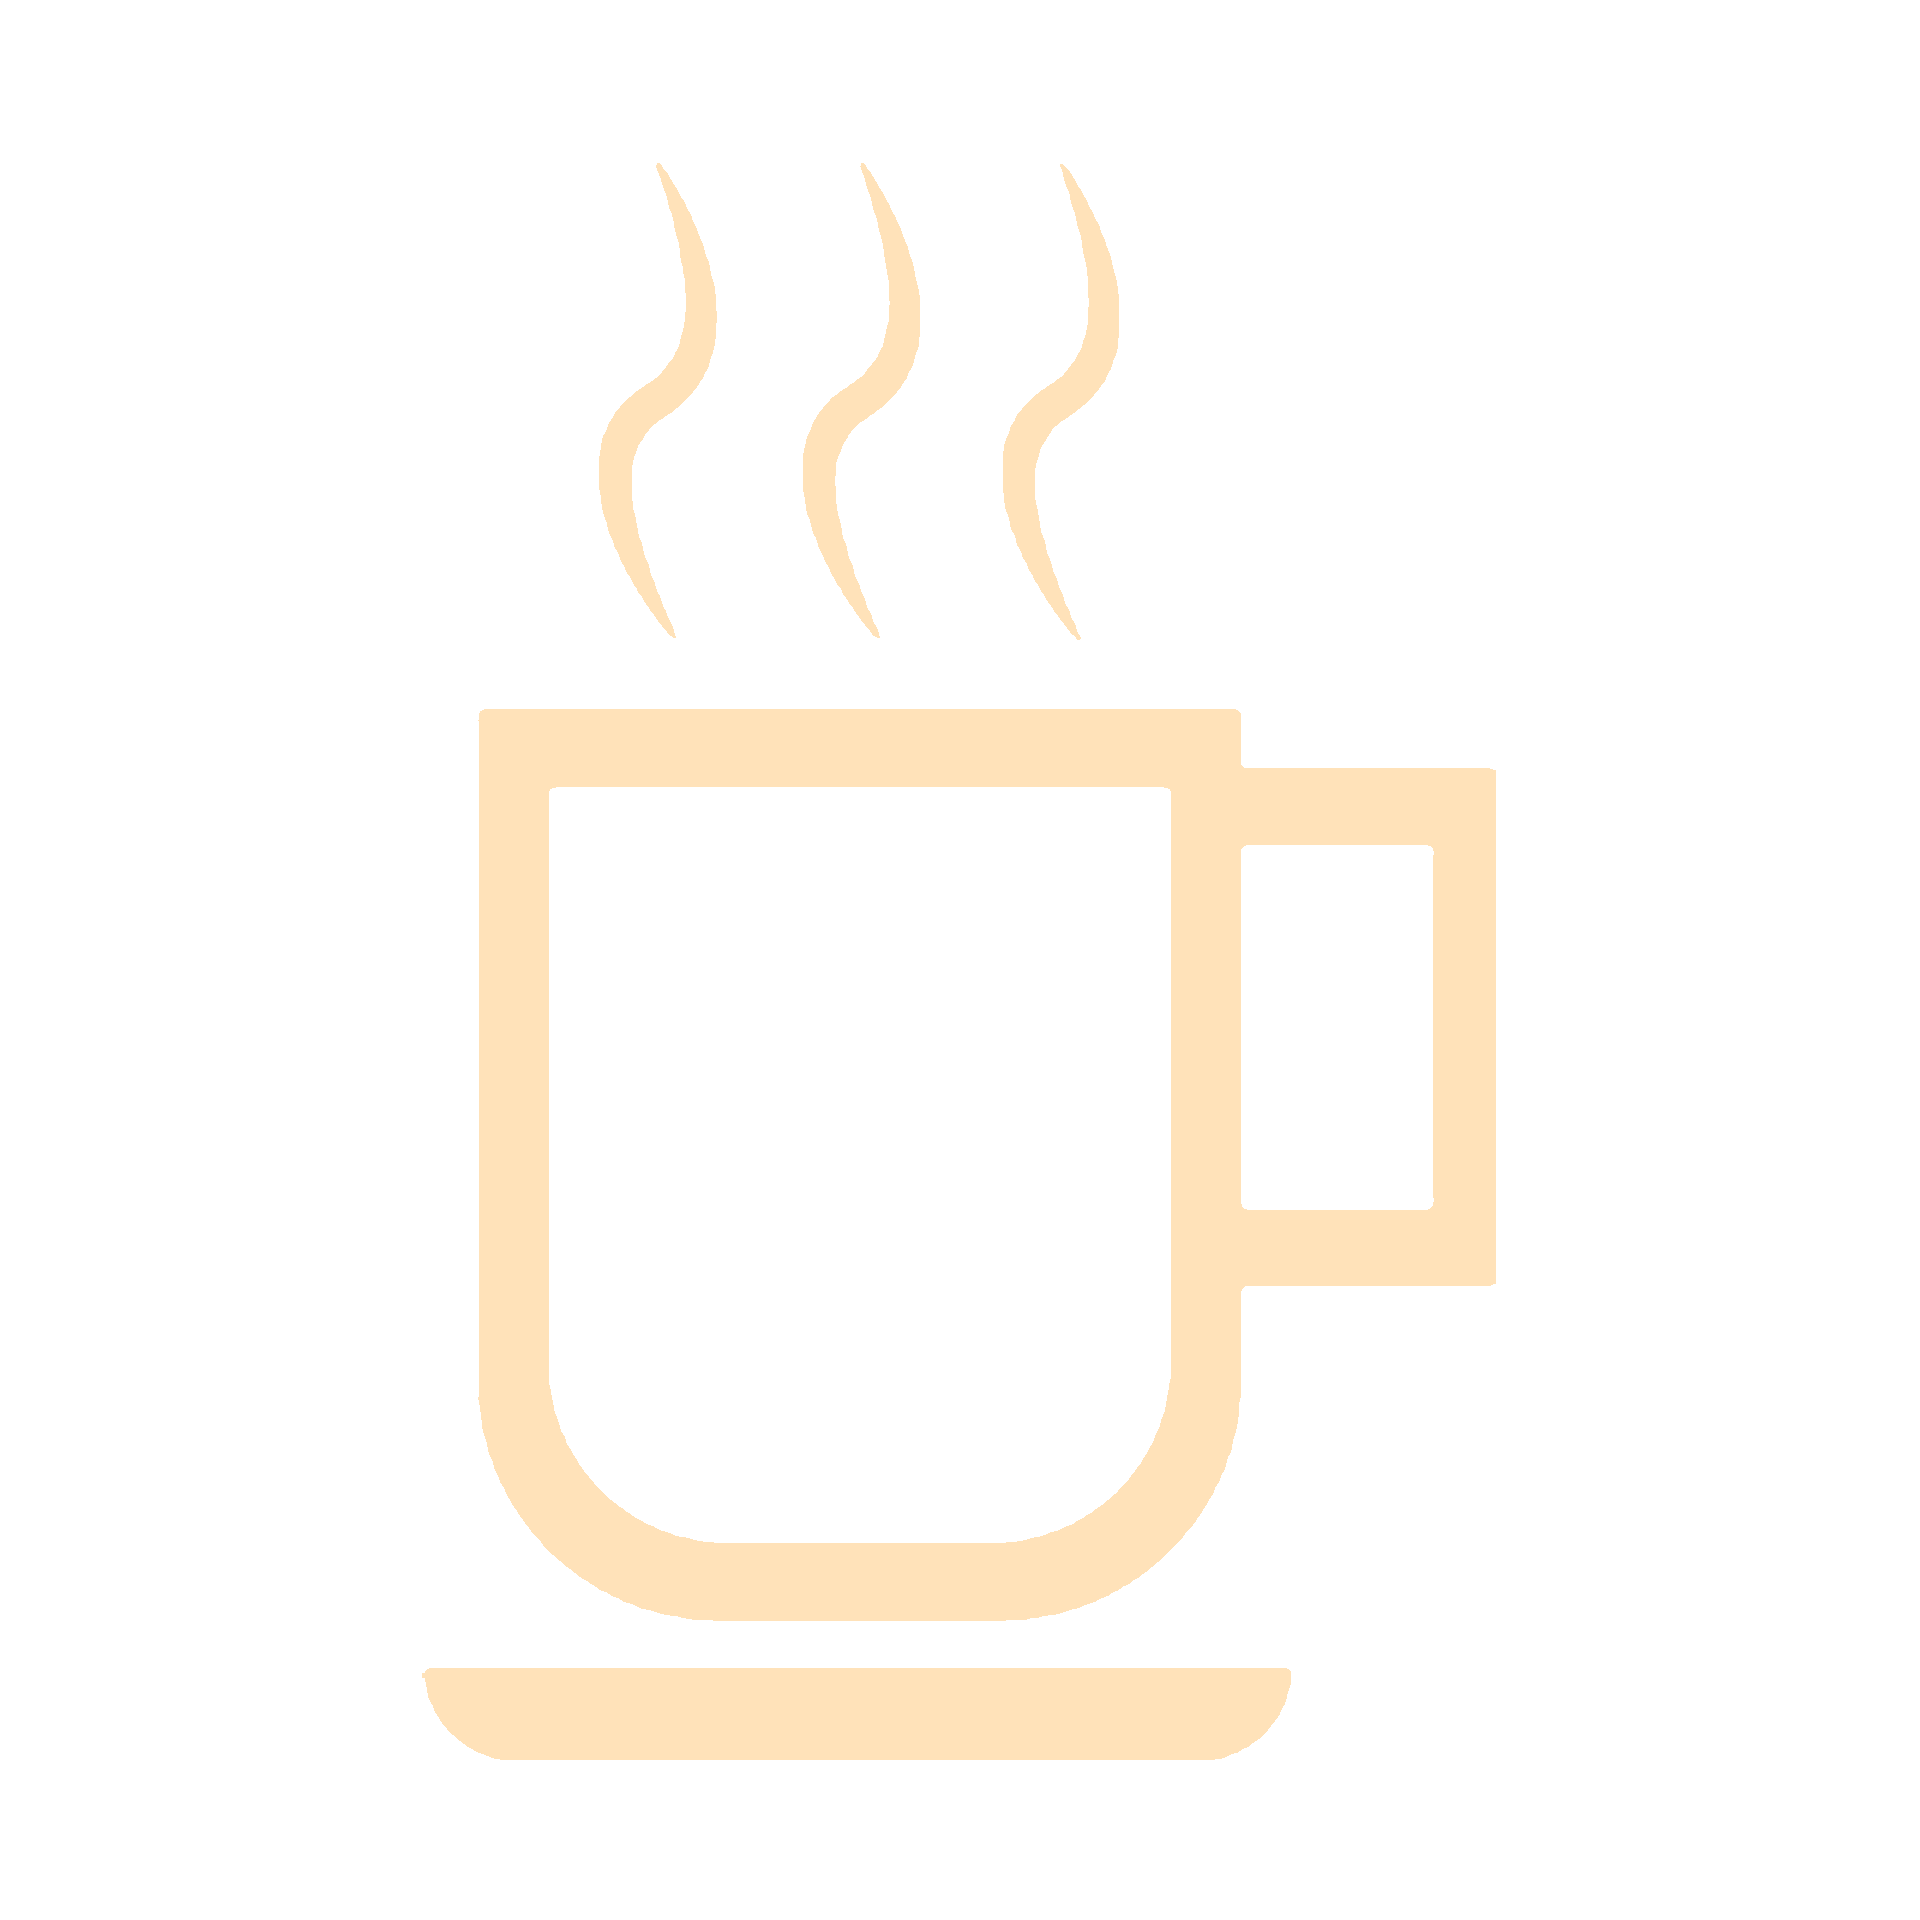 An animated image showing a coffee cup filling up